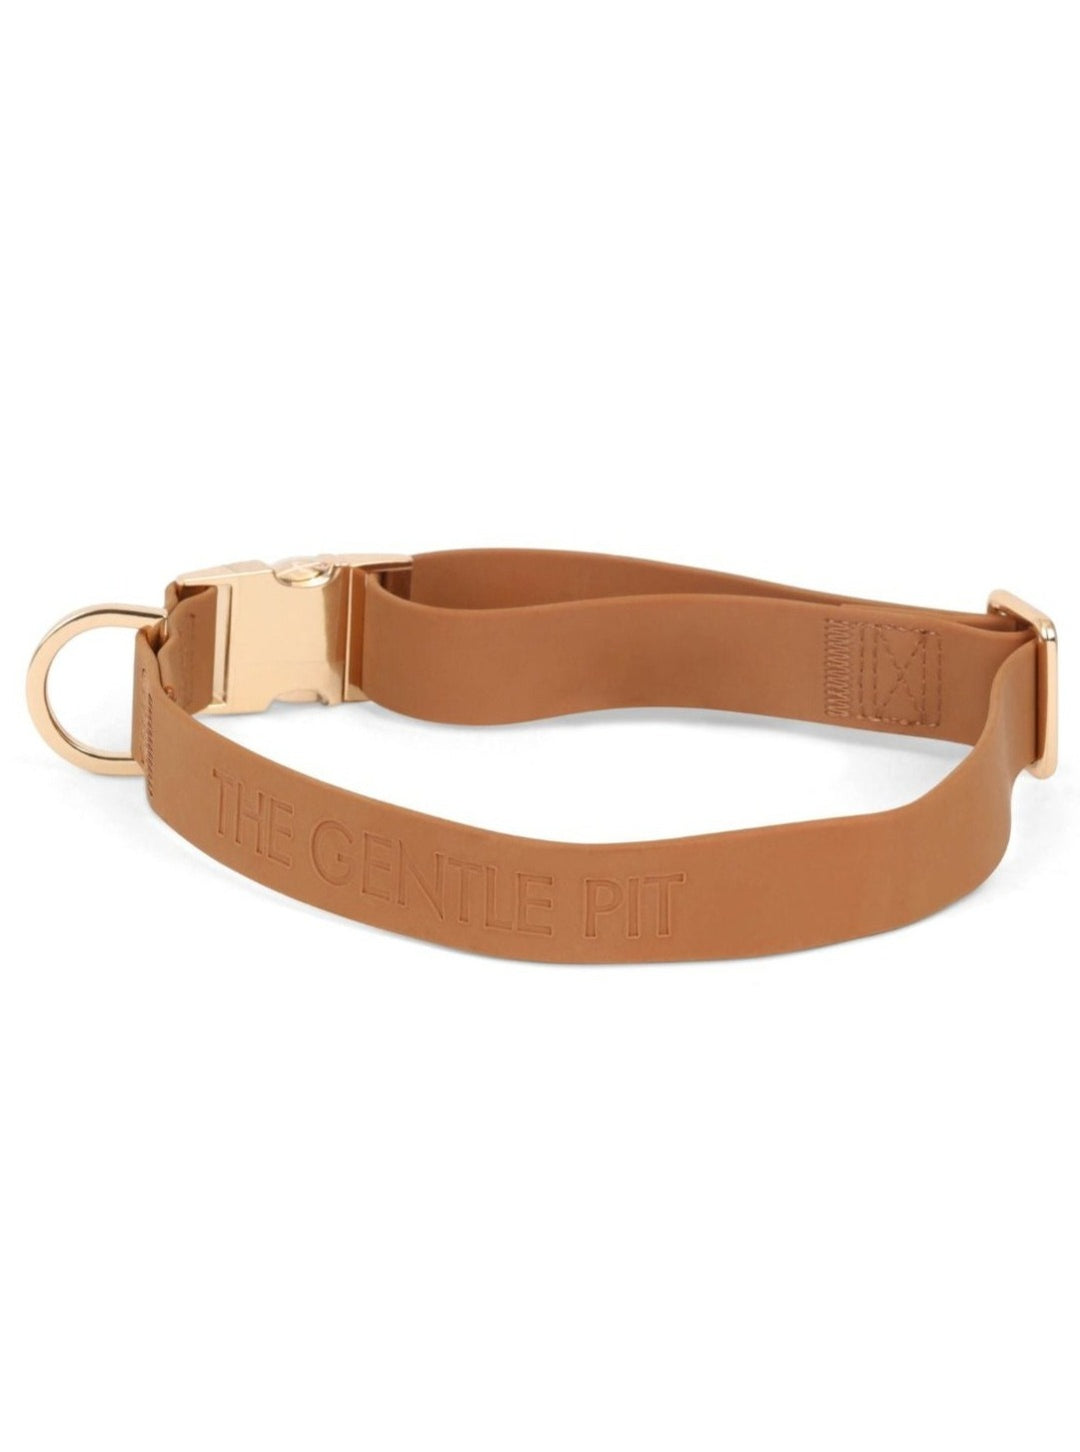 Louis Vuitton Dog collar - Must have!